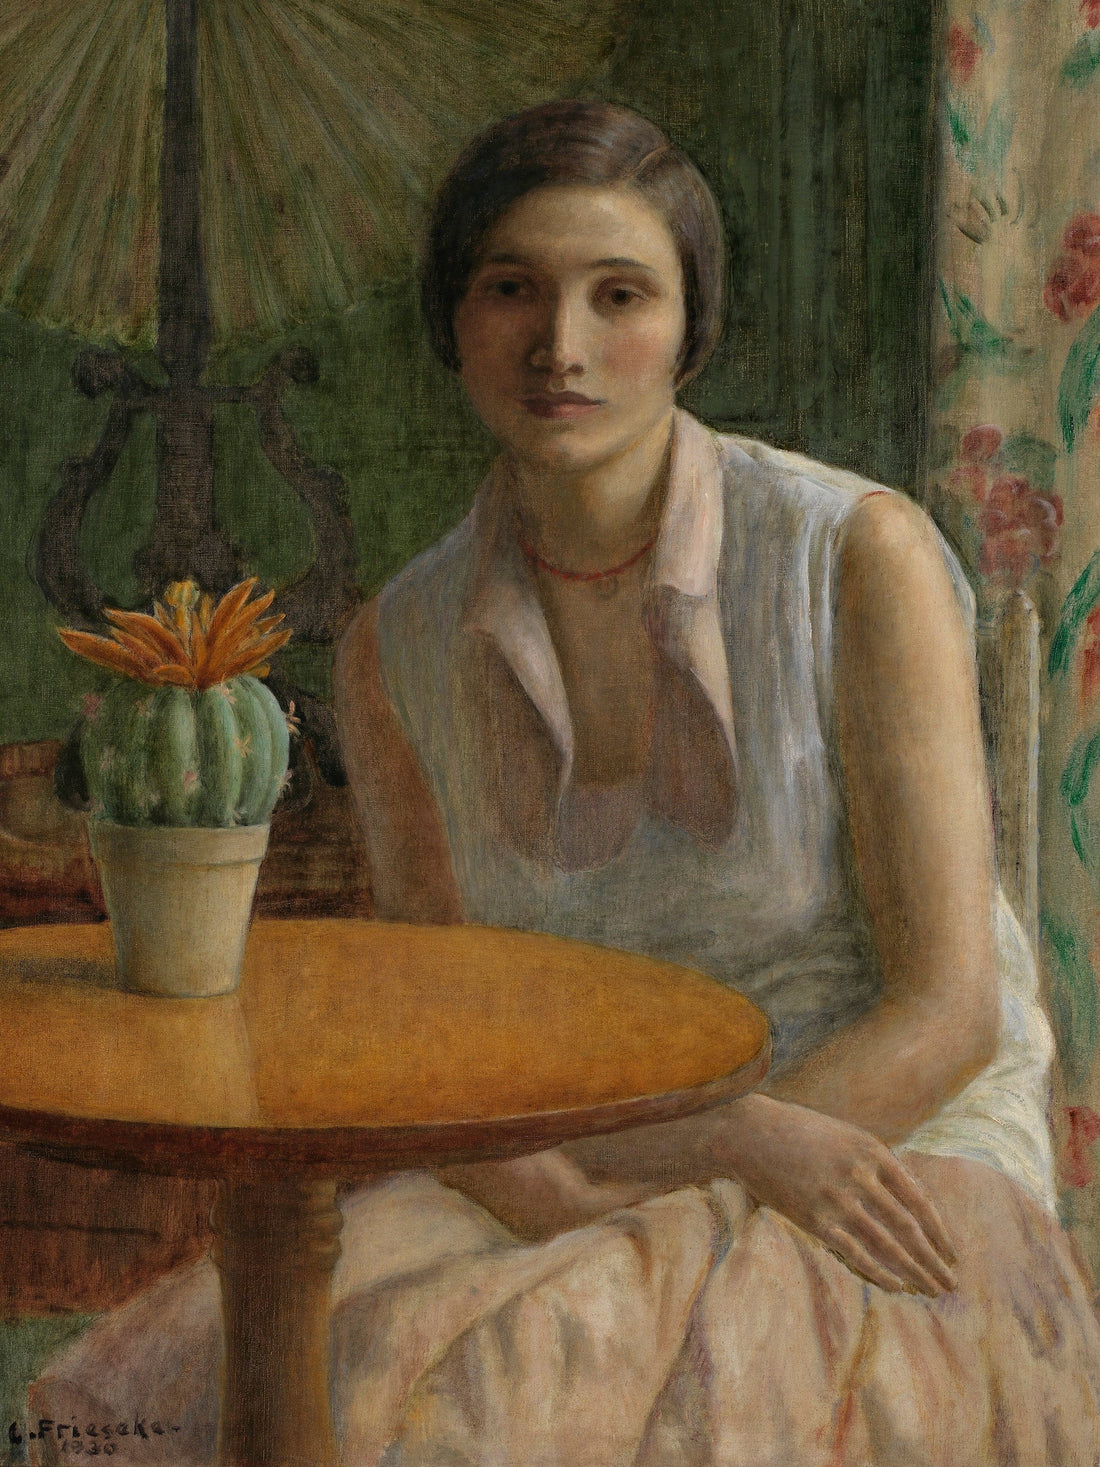 Portrait of Woman with Cactus